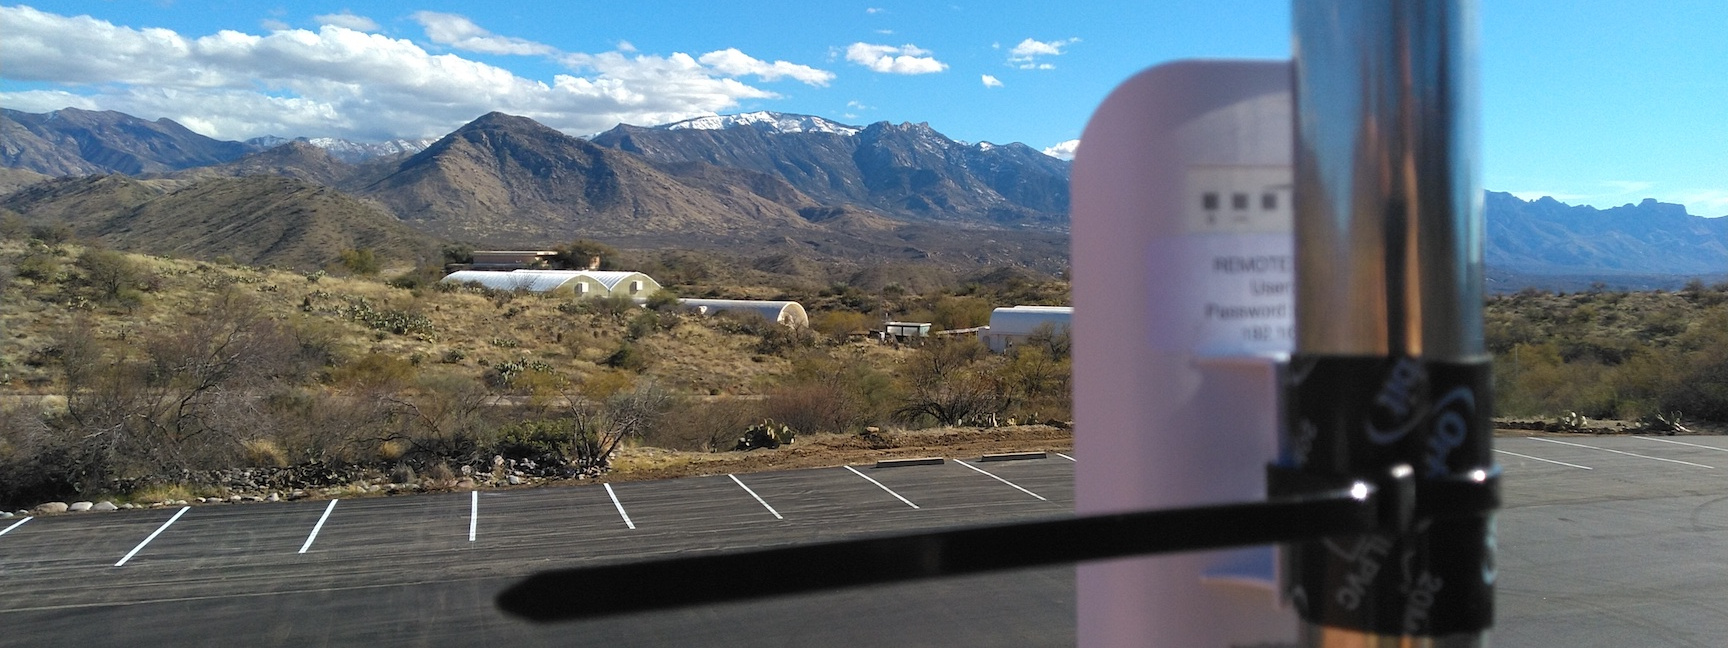 P2P WiFi from SAM Ops to the SAM Mars yard at Biosphere 2